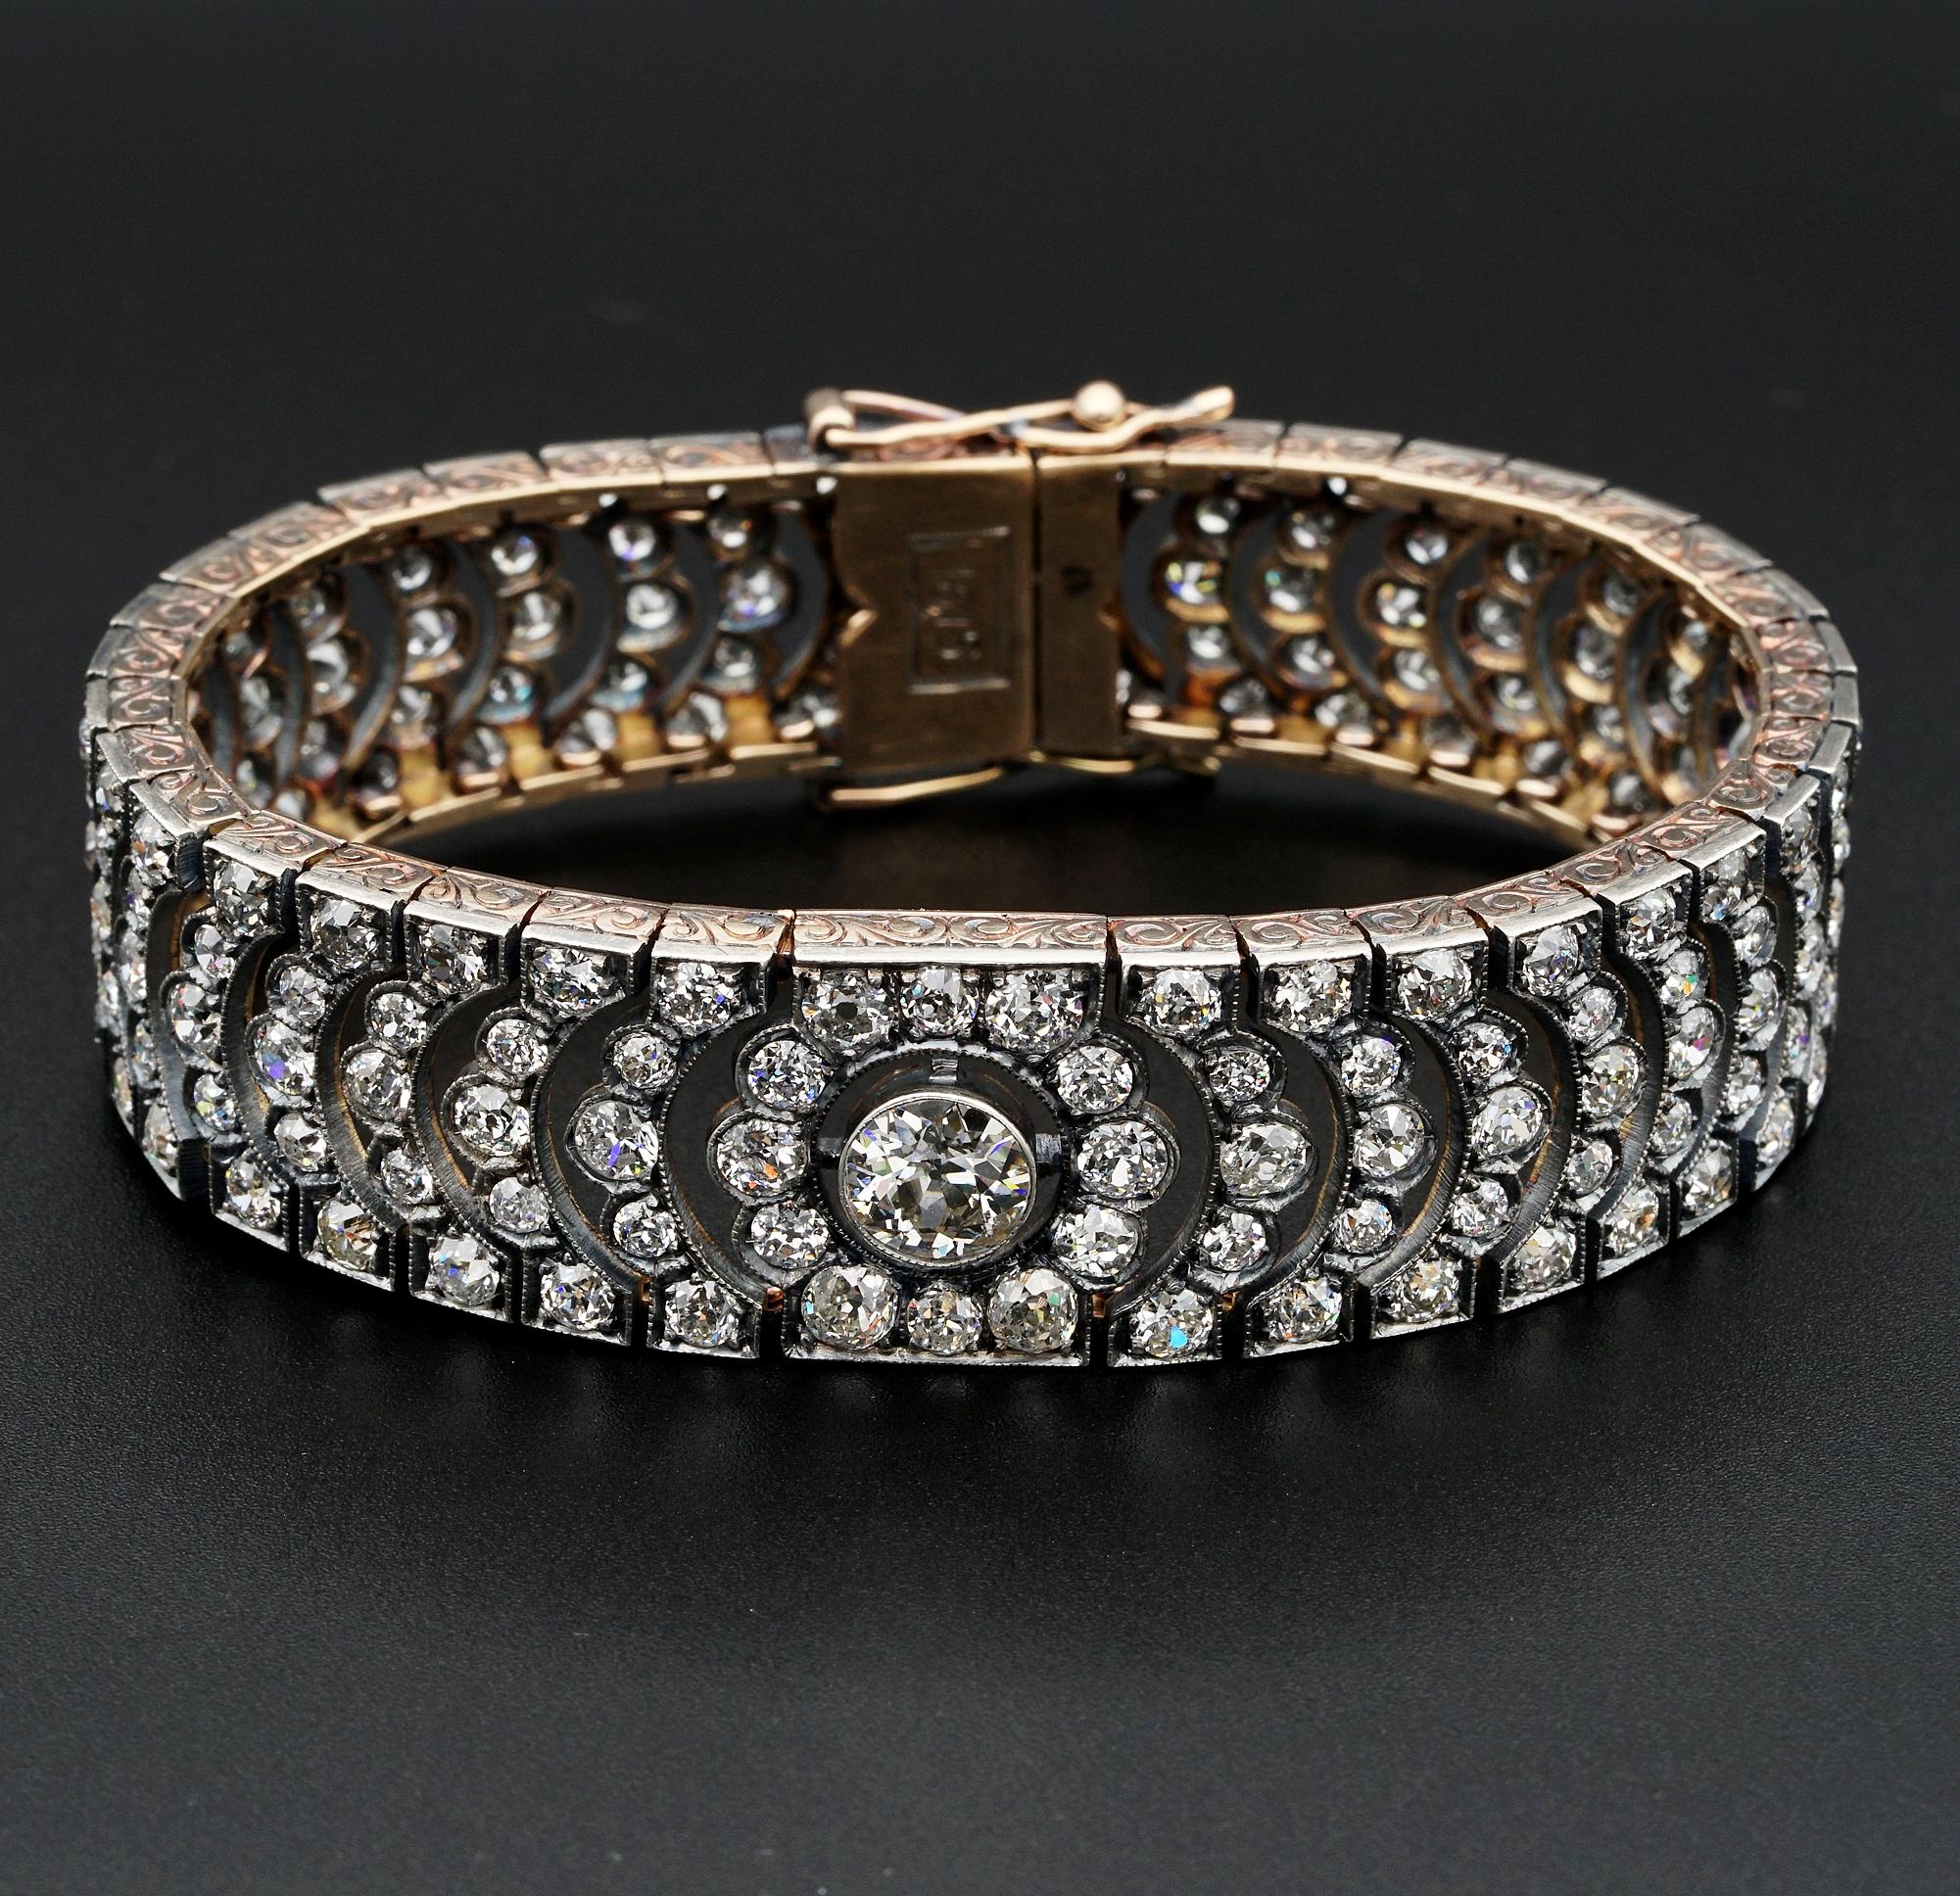 Heirloom

Facts: rare and quite outstanding French origin, fully hallmarked, Victorian Diamond bracelet
An Heirloom piece of the antique jewellery witness of past history, treasure to get hold of!
1890 ca, it also bears Diamond TCW impressed on the